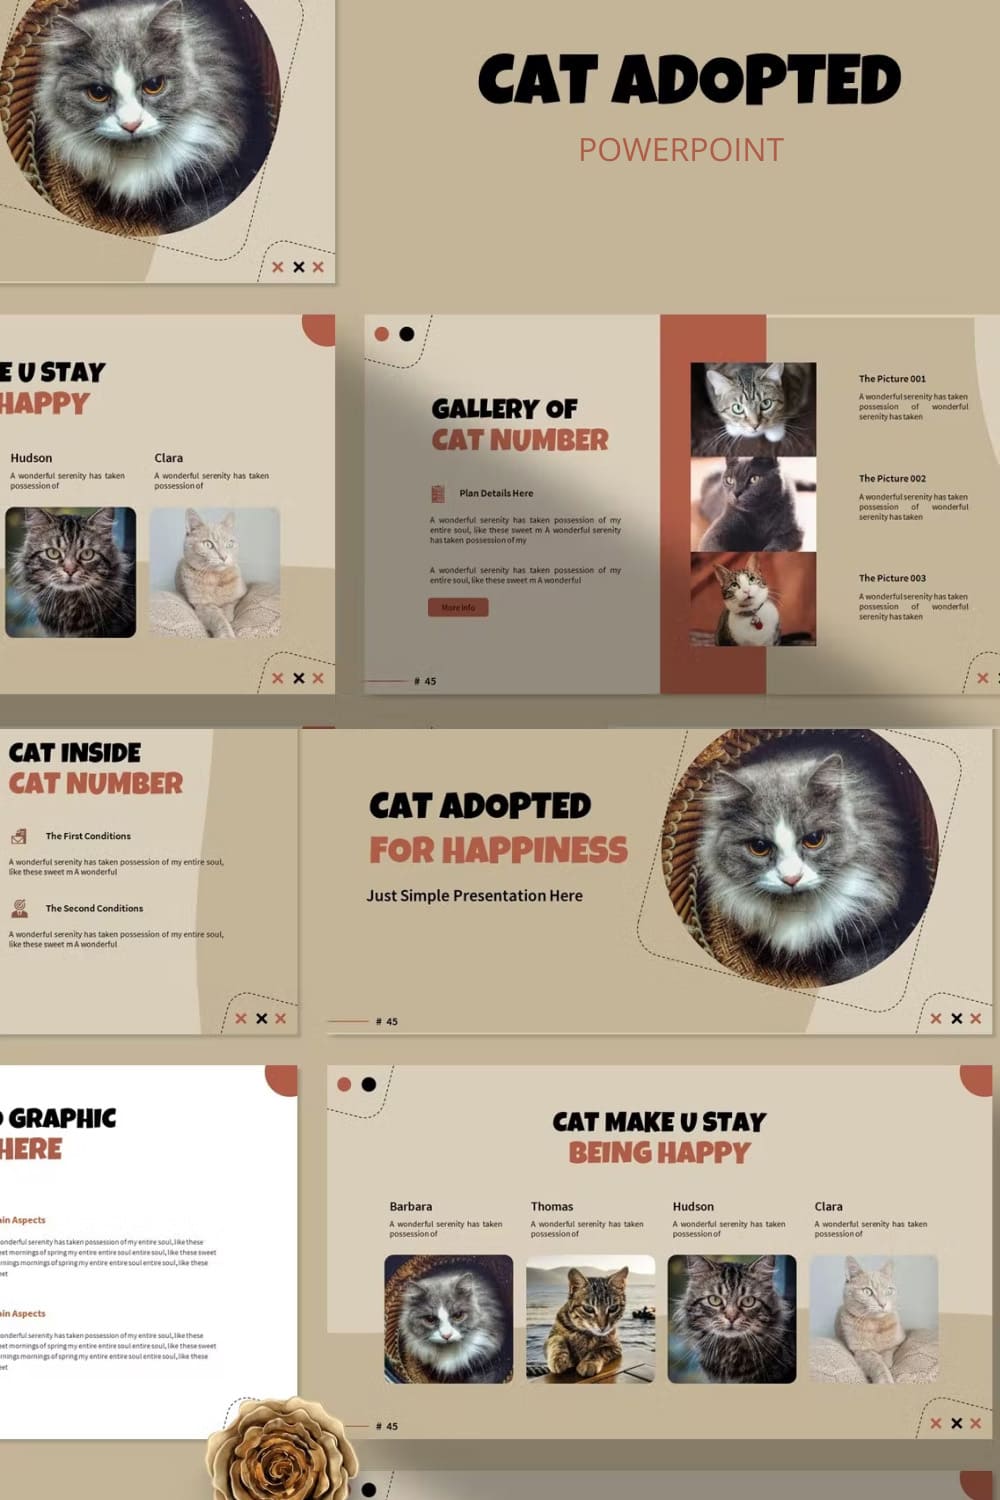 Cat adopted for happines powerpoint template - pinterest image preview.